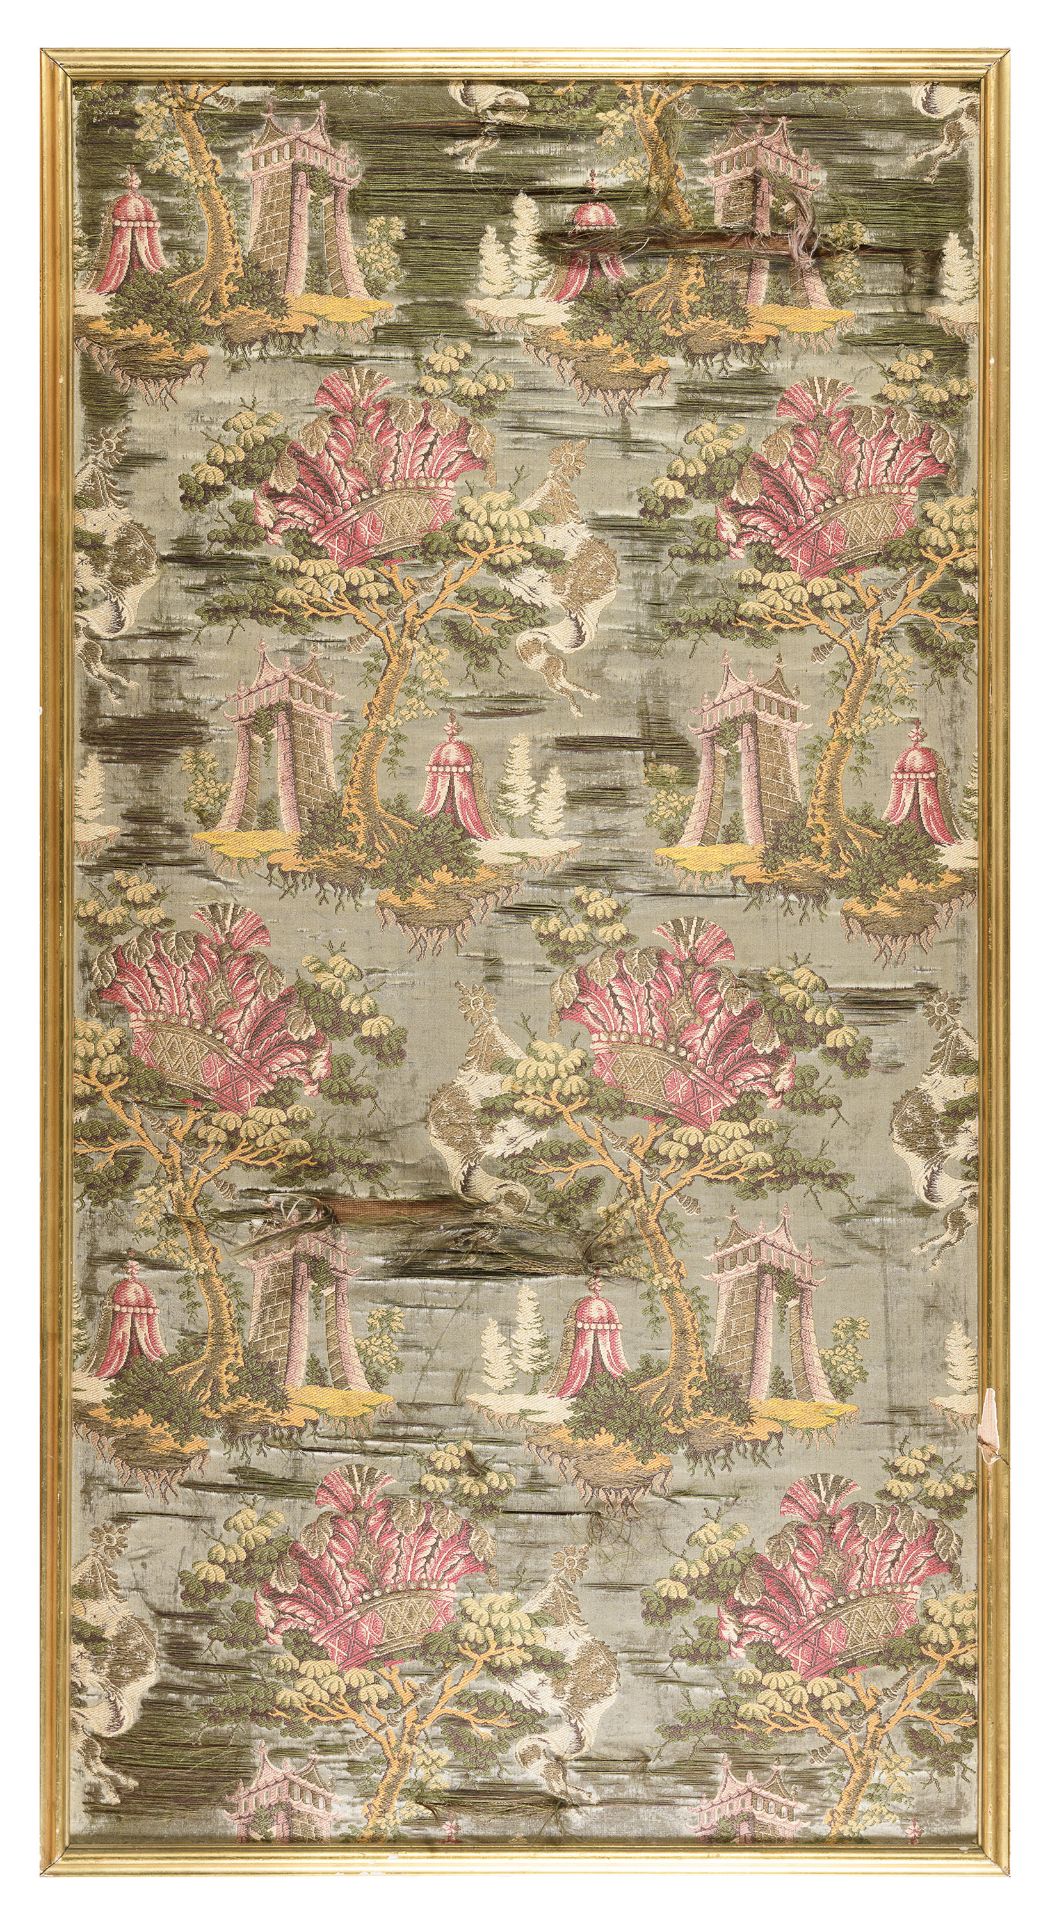 TWO NORTH-EUROPEAN SILK QUILTS WITH CHINESE DECORATION. LATE 19TH CENTURY. DEFECTS AND LACKS. - Bild 2 aus 2